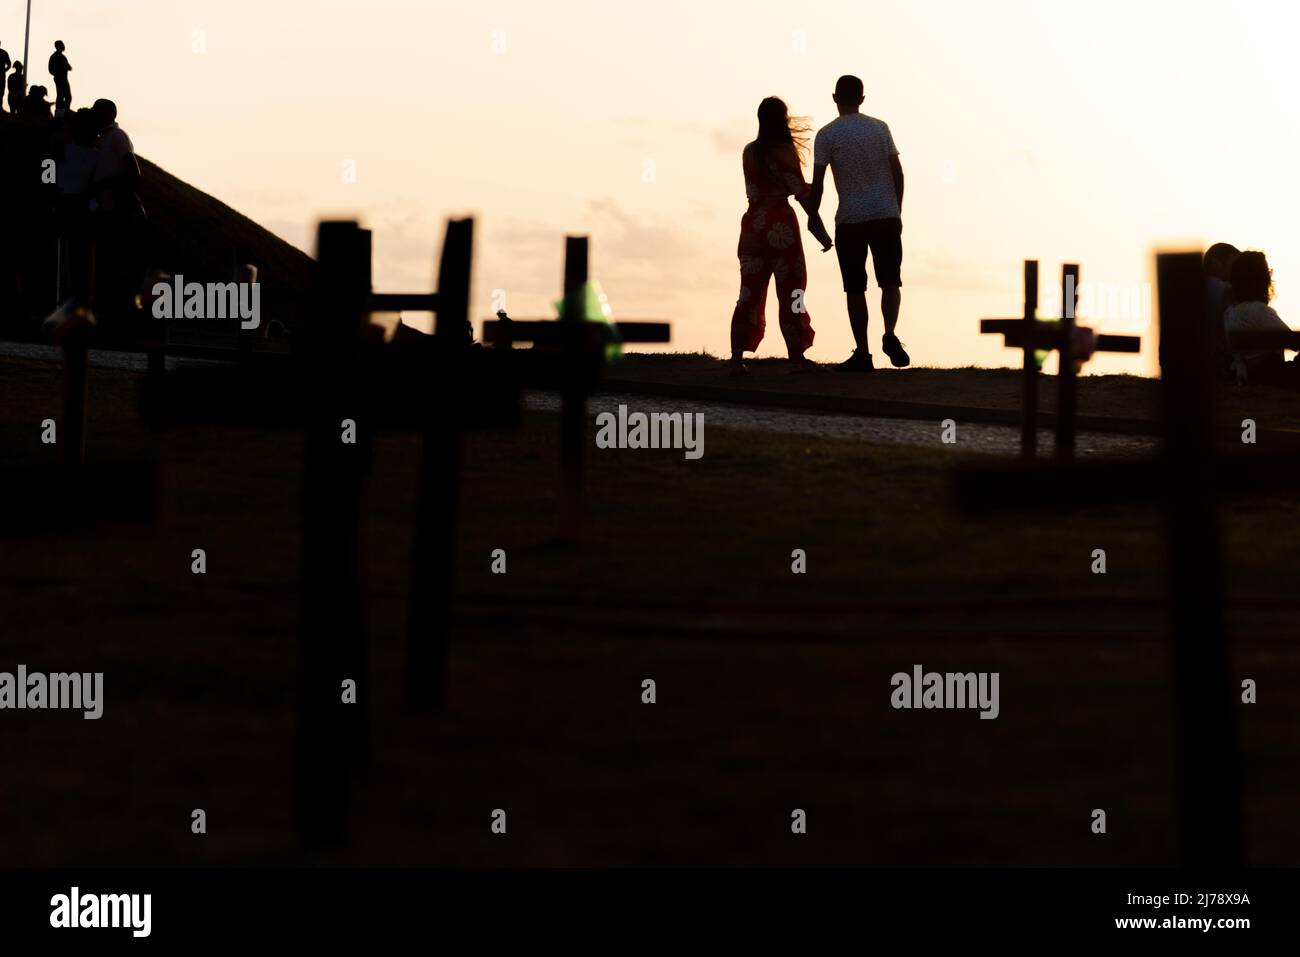 Salvador, Bahia, Brazil - October 01, 2021: Silhouette of people and crosses fixed on the ground in honor of those killed by covid-19. Sunset in Salva Stock Photo